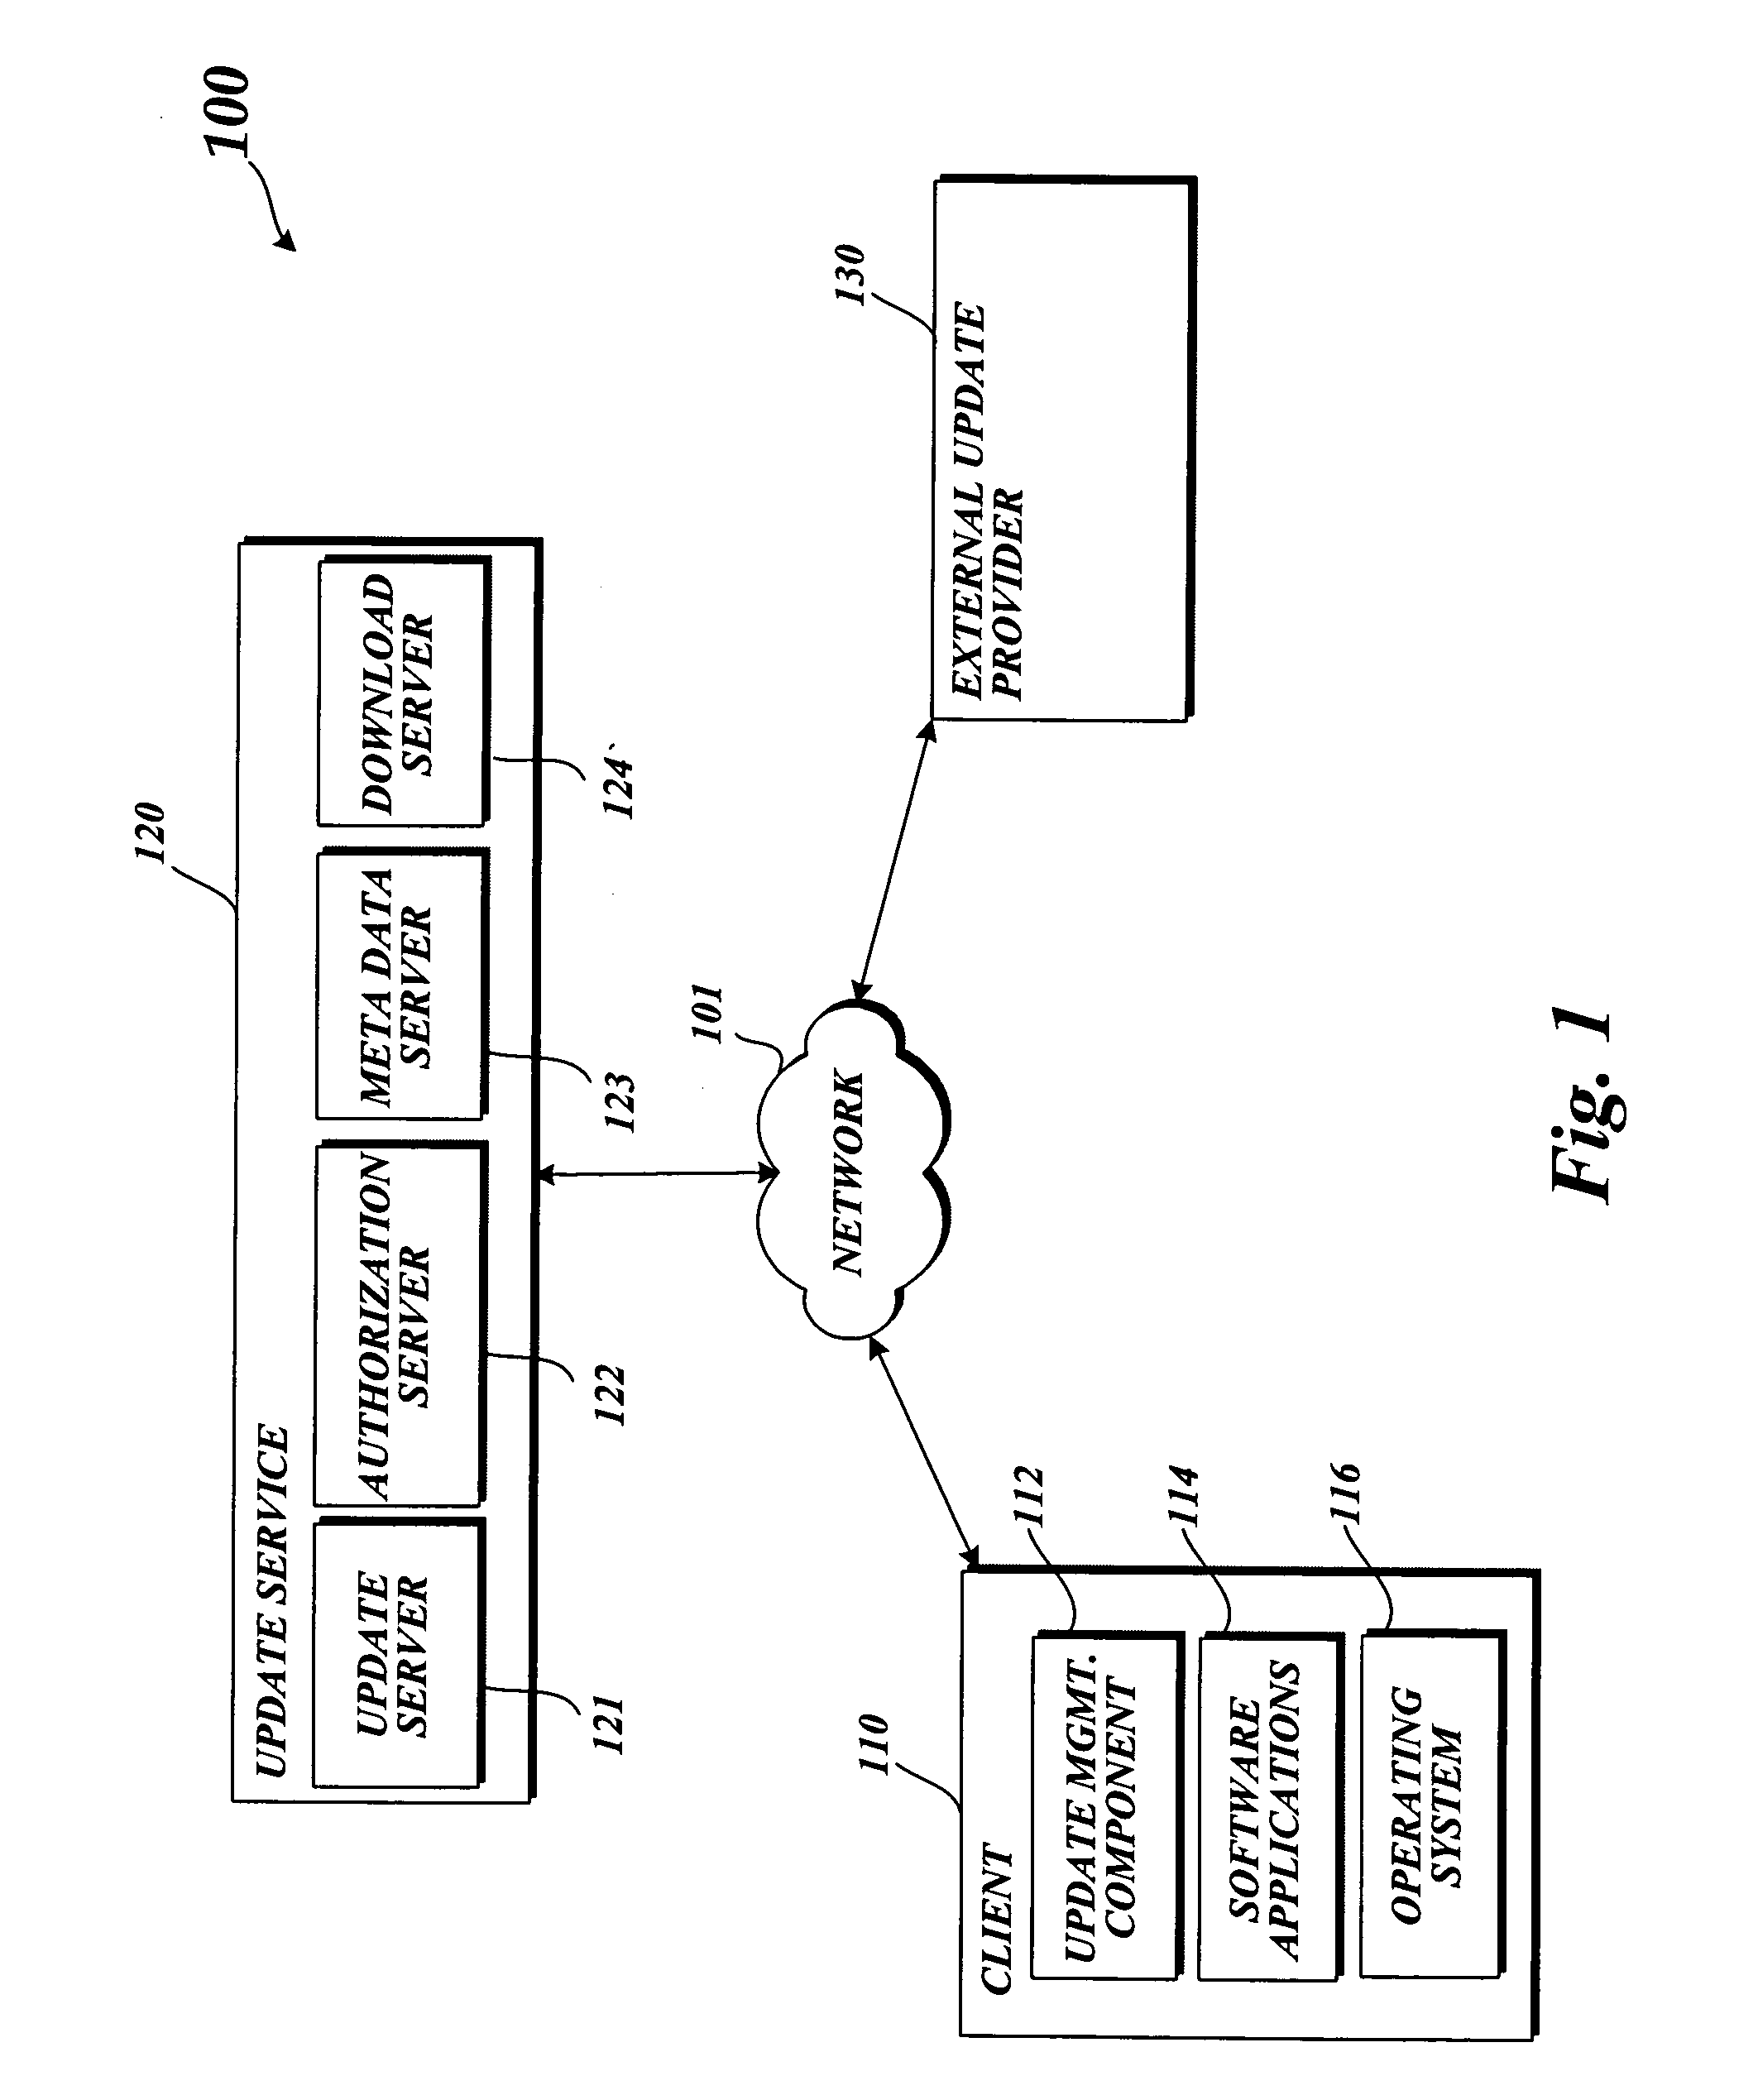 System and method for a software distribution service